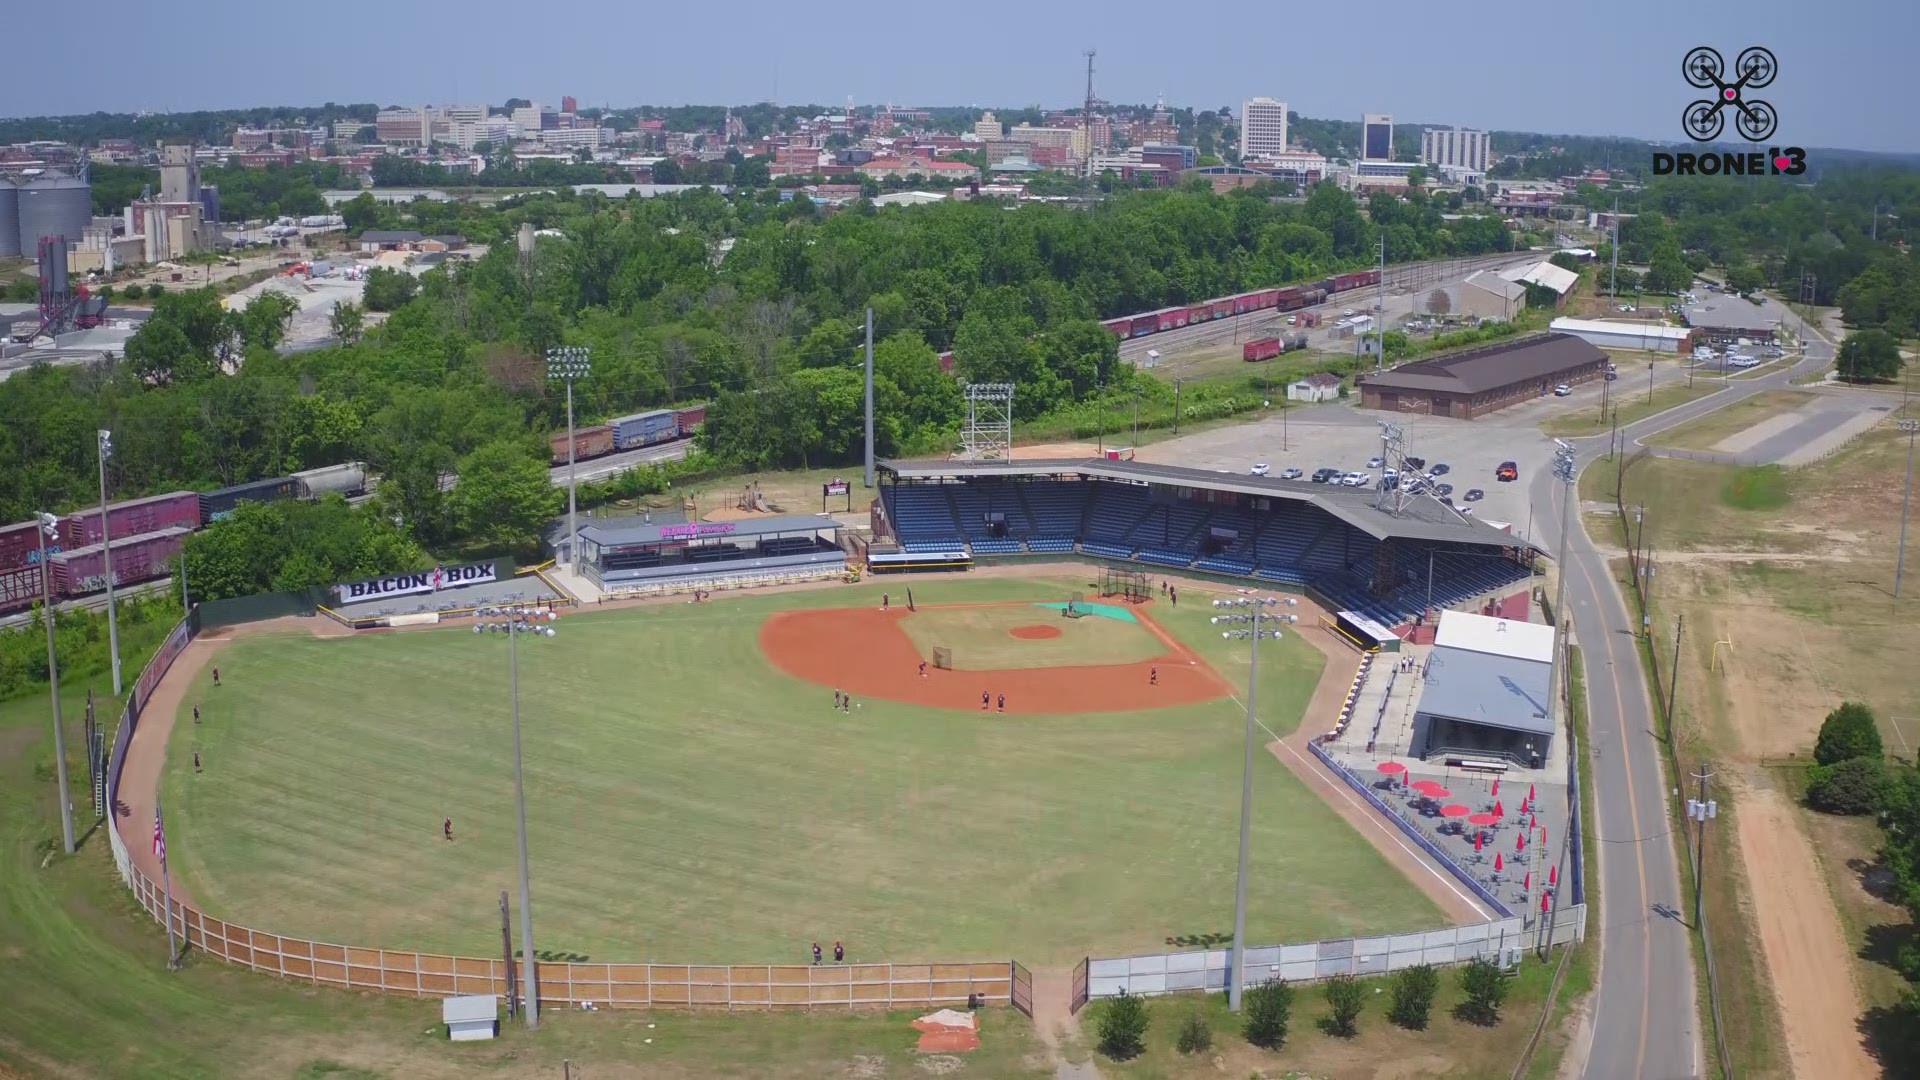 #Drone13 caught the 2019 Macon Bacon taking the field as our crews checked out off season improvements to historic Luther Williams Field. The minor league park dates to 1929.